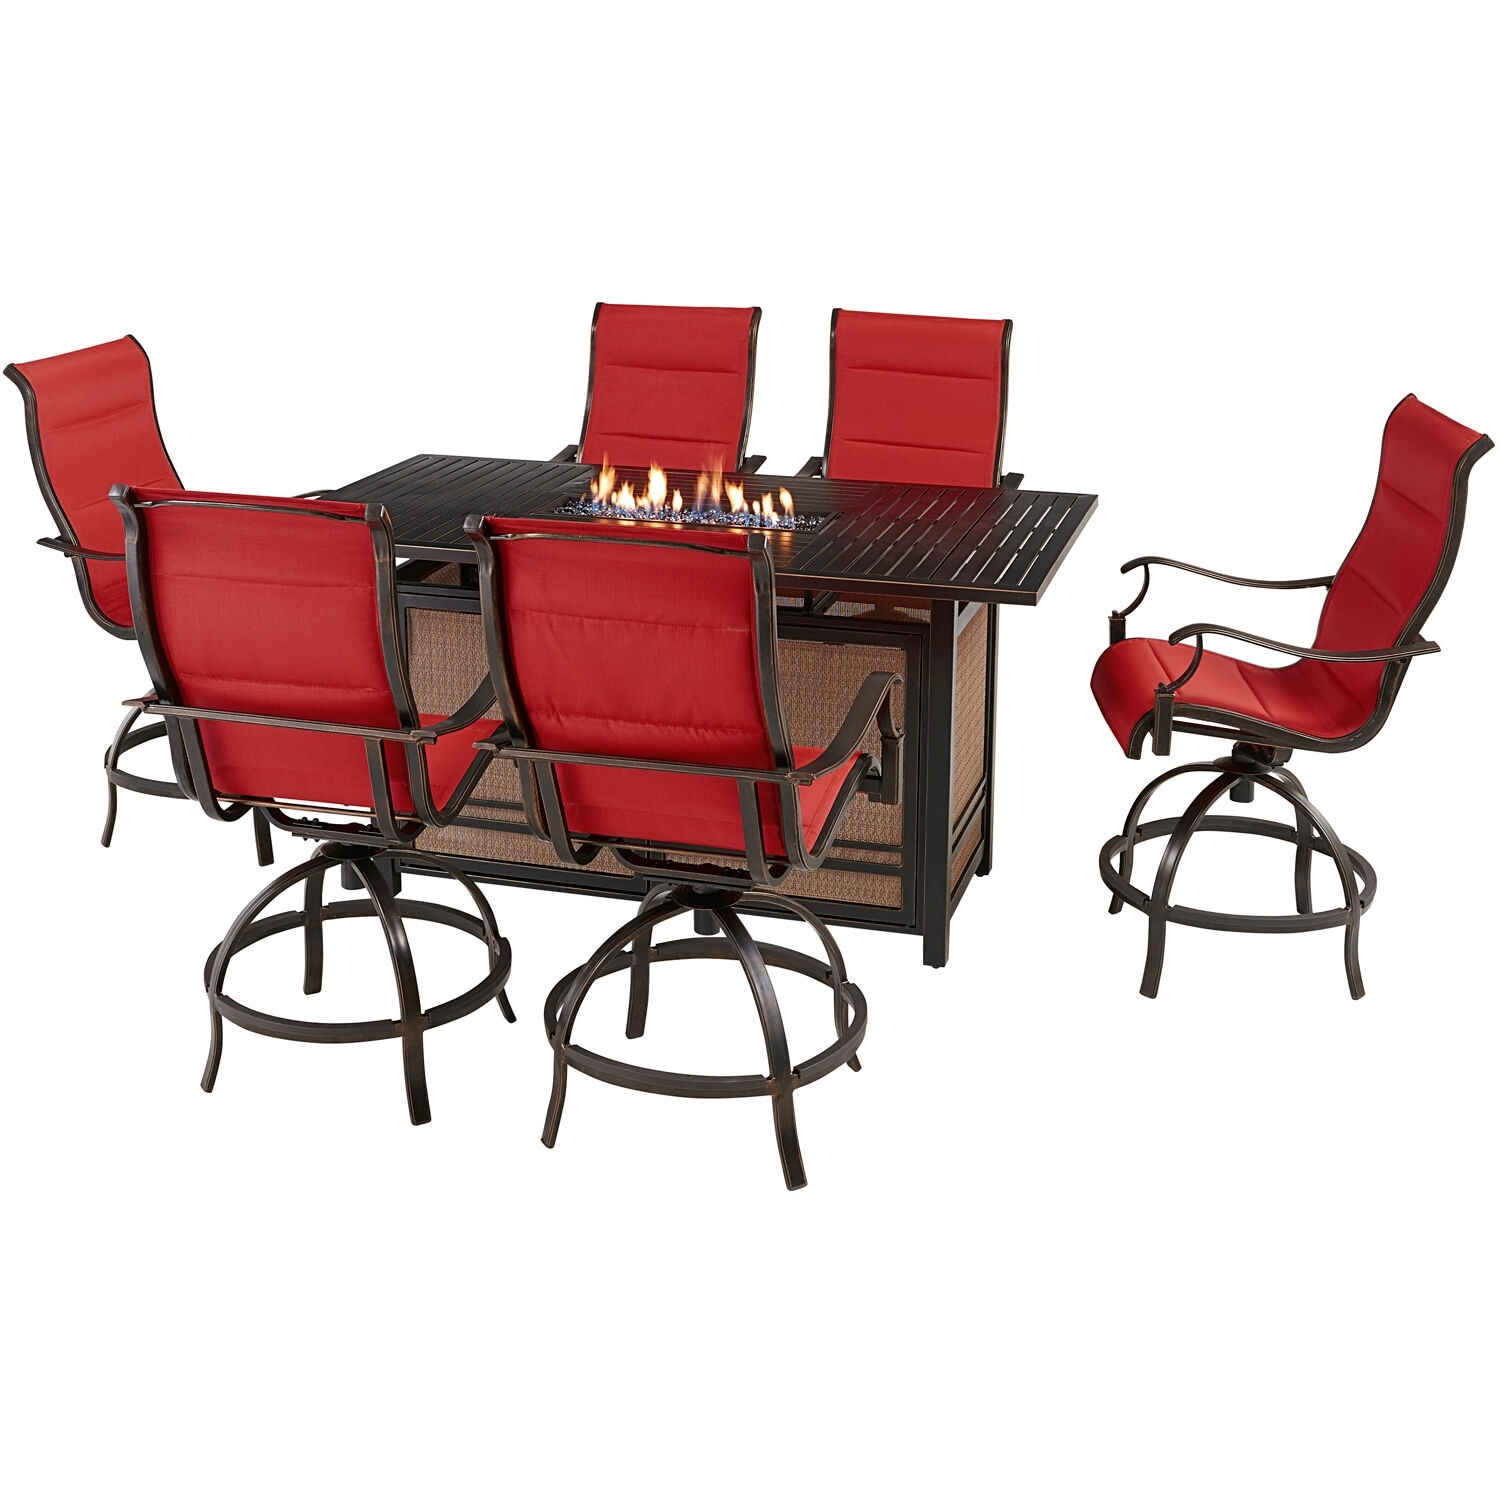 Hanover Traditions 7-Piece High-Dining Set in Red with6 Padded Counter-Height Swivel Chairs and a 30,000 BTU Fire Pit Dining Table